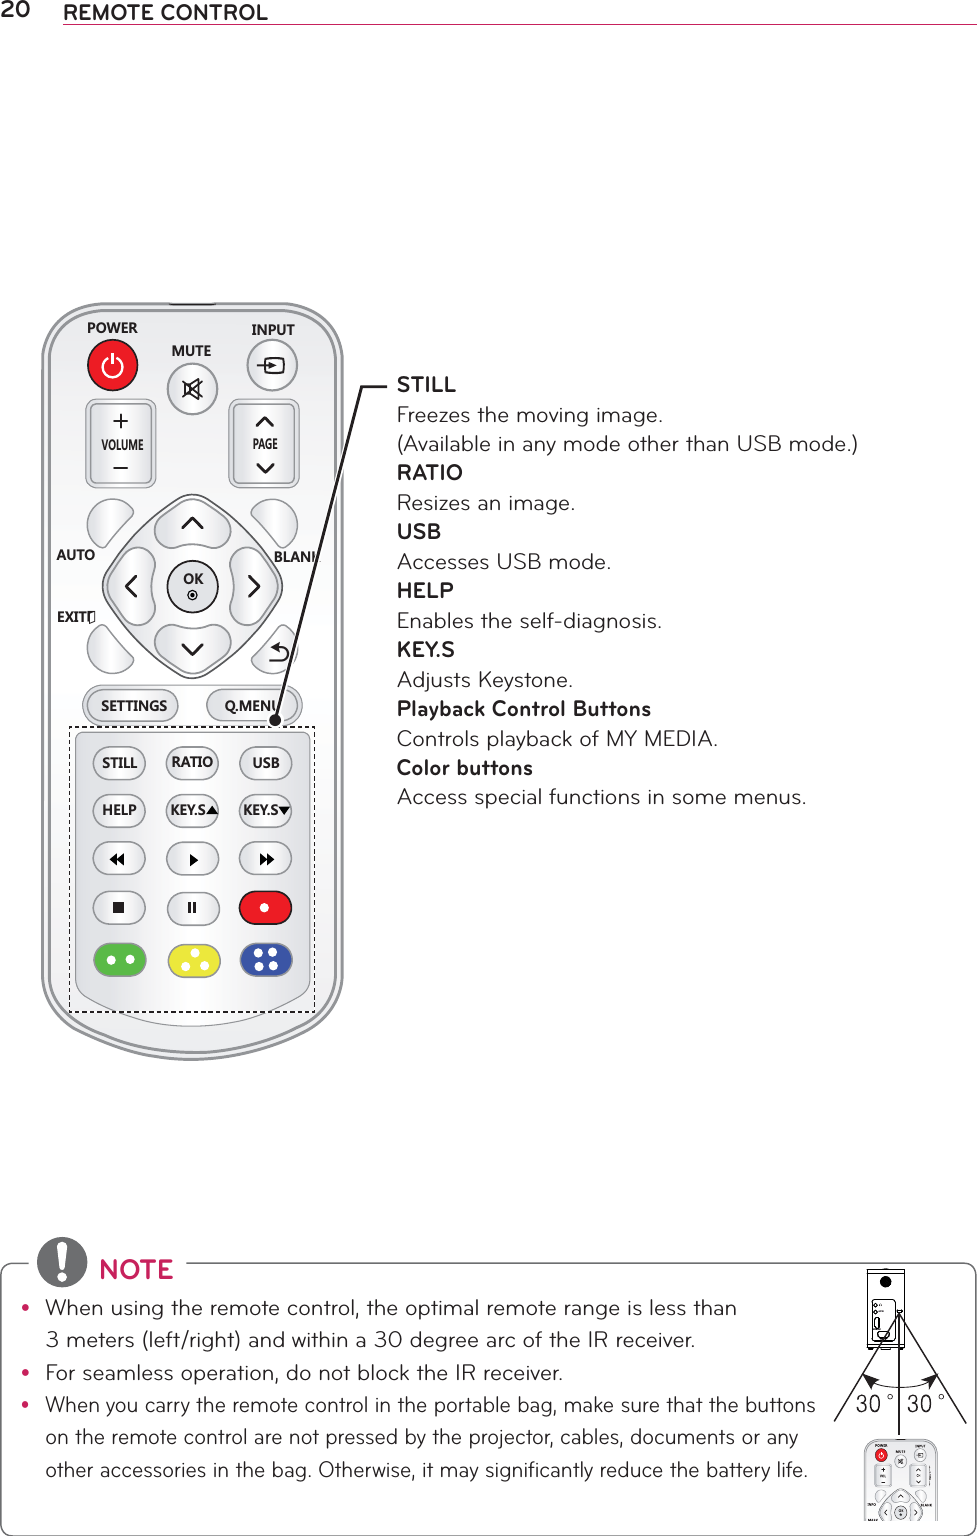 20 REMOTE CONTROL219&apos;4/76&apos;+027681.7/&apos;2#)&apos;#761 $.#0-&apos;:+6ꕯꕣ5&apos;66+0)5 3/&apos;0756+..1-4#6+1 75$*&apos;.2 -&apos;;5 -&apos;;5 NOTEy When using the remote control, the optimal remote range is less than  3 meters (left/right) and within a 30 degree arc of the IR receiver.y For seamless operation, do not block the IR receiver.y When you carry the remote control in the portable bag, make sure that the buttons on the remote control are not pressed by the projector, cables, documents or any other accessories in the bag. Otherwise, it may significantly reduce the battery life.STILLFreezes the moving image.(Available in any mode other than USB mode.)RATIOResizes an image.USBAccesses USB mode.HELPEnables the self-diagnosis. KEY.SAdjusts Keystone.Playback Control ButtonsControls playback of MY MEDIA.Color buttonsAccess special functions in some menus.HDMI/DVIRGB INA/V IN# ## #